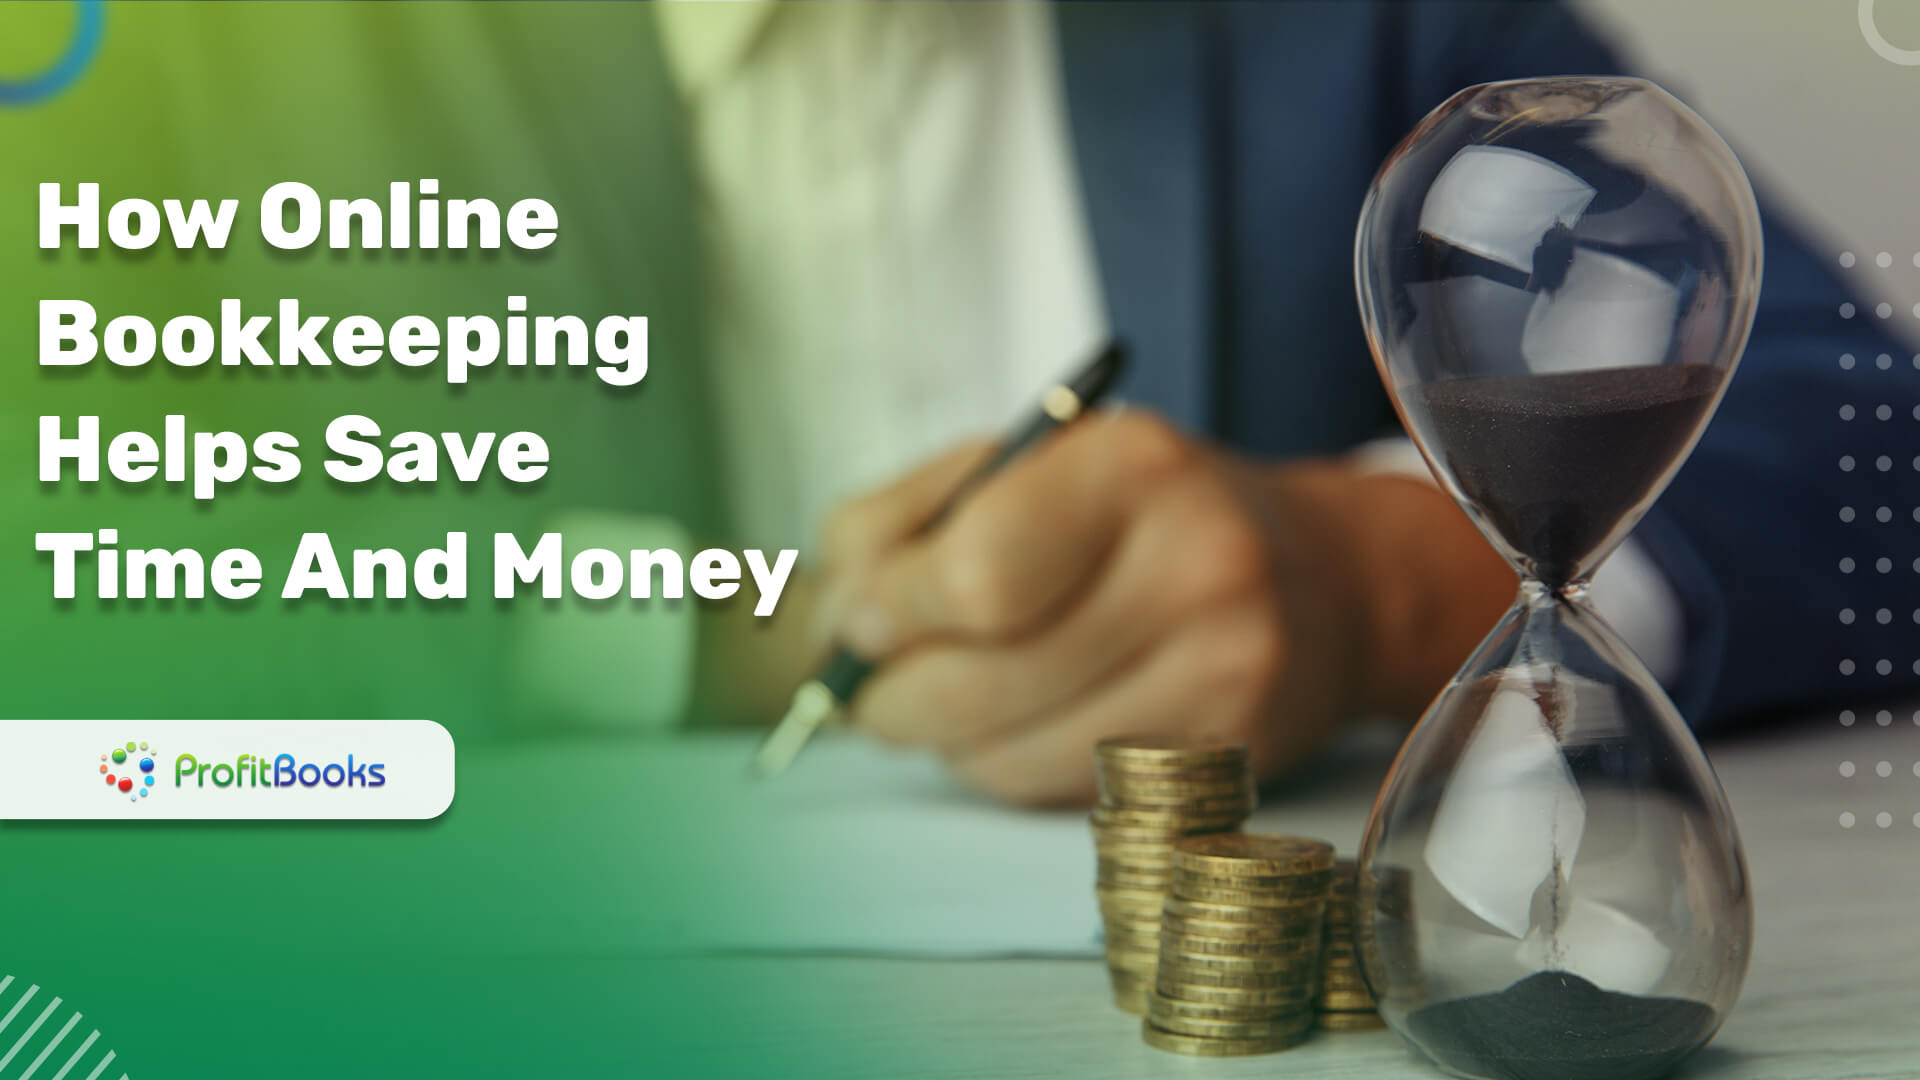 Online Bookkeeping Helps Save Time And Money